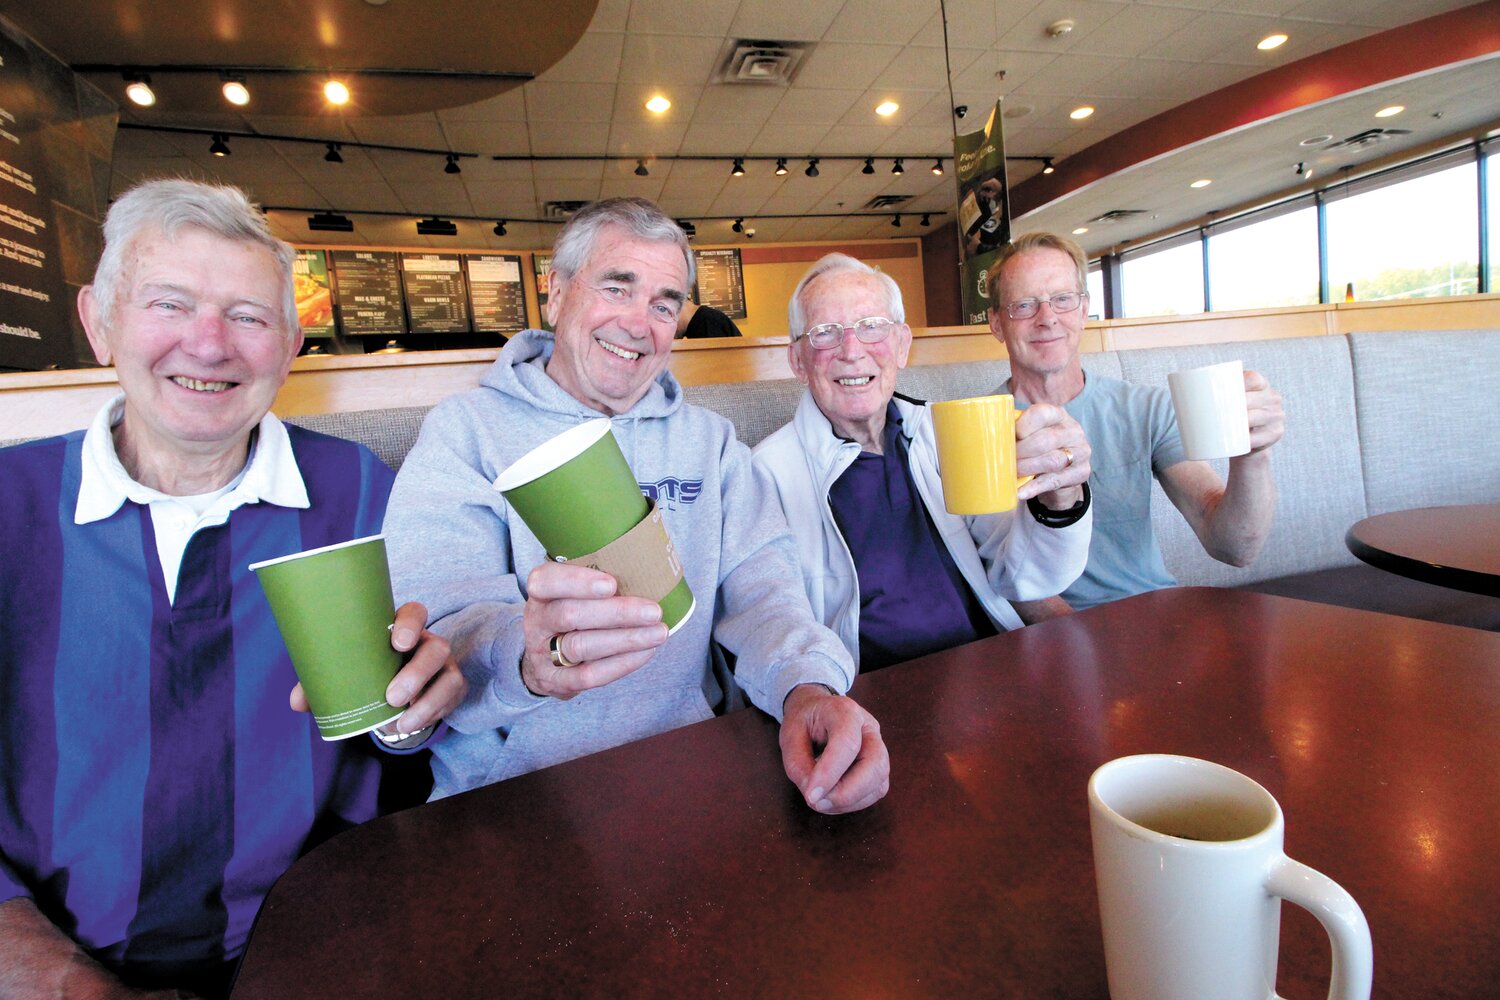 HOLDING COURT:  Bob Coker, second from right is joined by his son, Dave at right and Ed Blamires and Joseph Crowley on a recent Saturday morning for coffee following league play at Tennis Rhode Island. Bob Coker started the league soon after Toll Gate High opened in the early 1970s and continued playing up until a couple of years ago.  (Warwick Beacon photo)